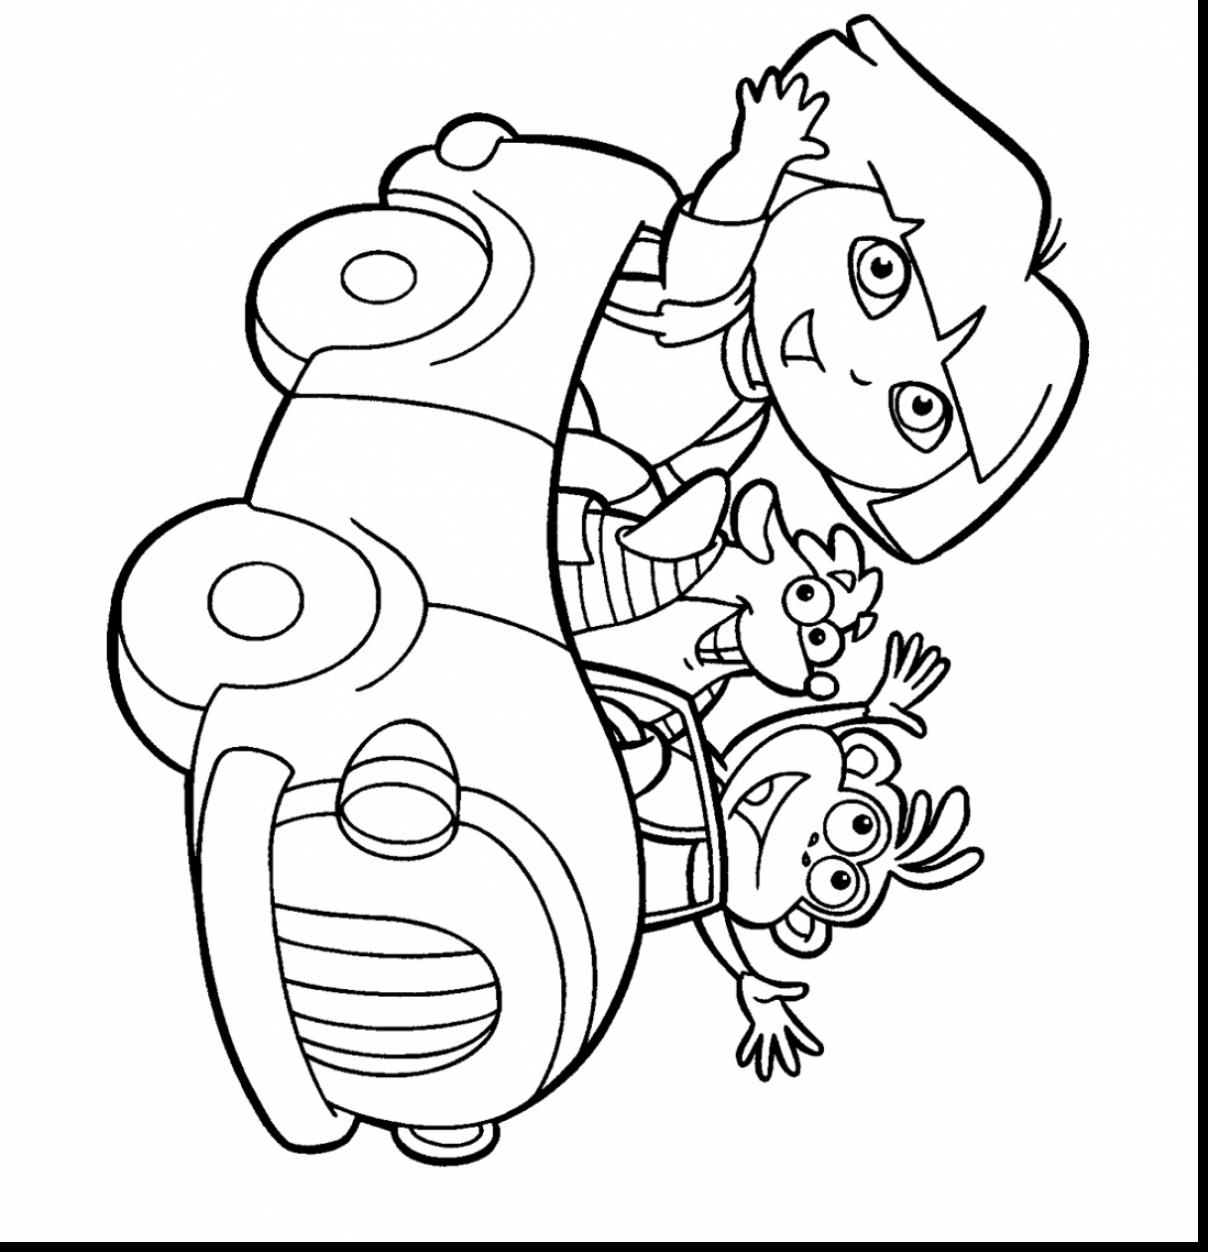 Convert Photo To Coloring Page at Free